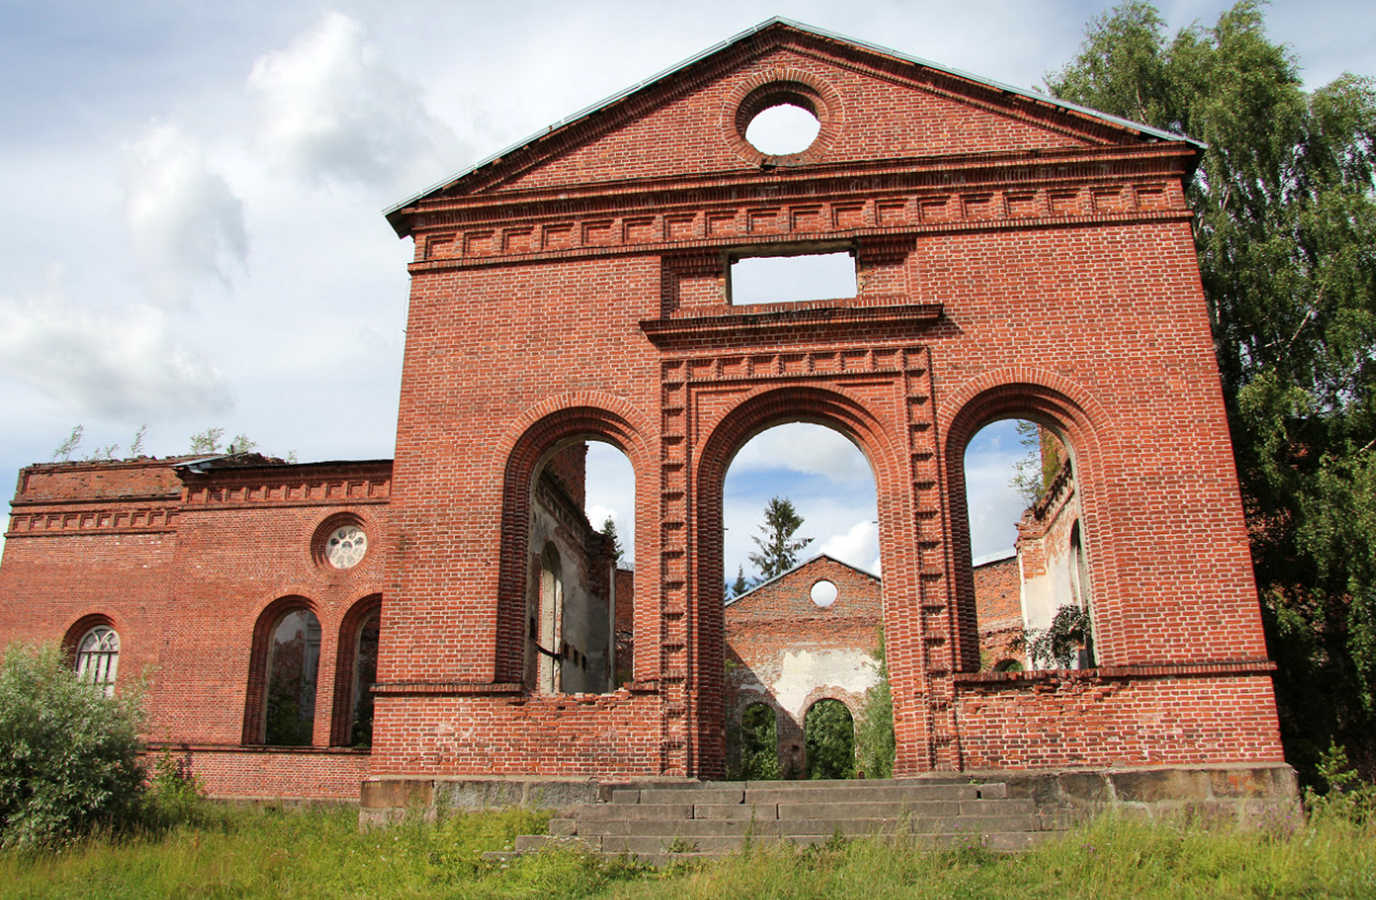 2010's. Ruins of the church